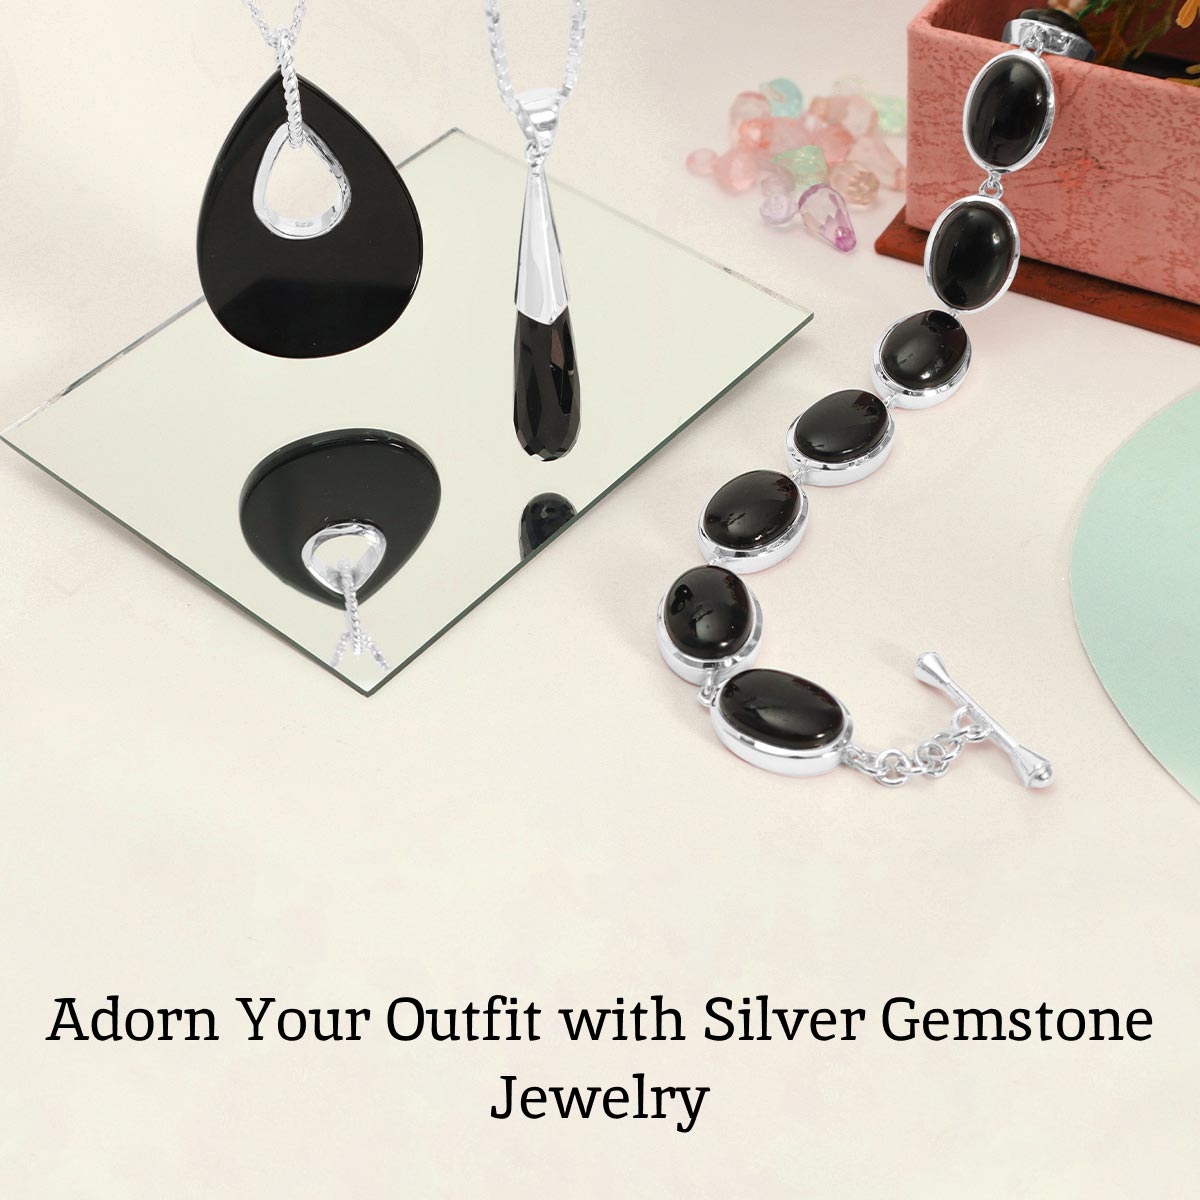 How to Choose The Best Silver Gemstone Jewelry For Your Outfit